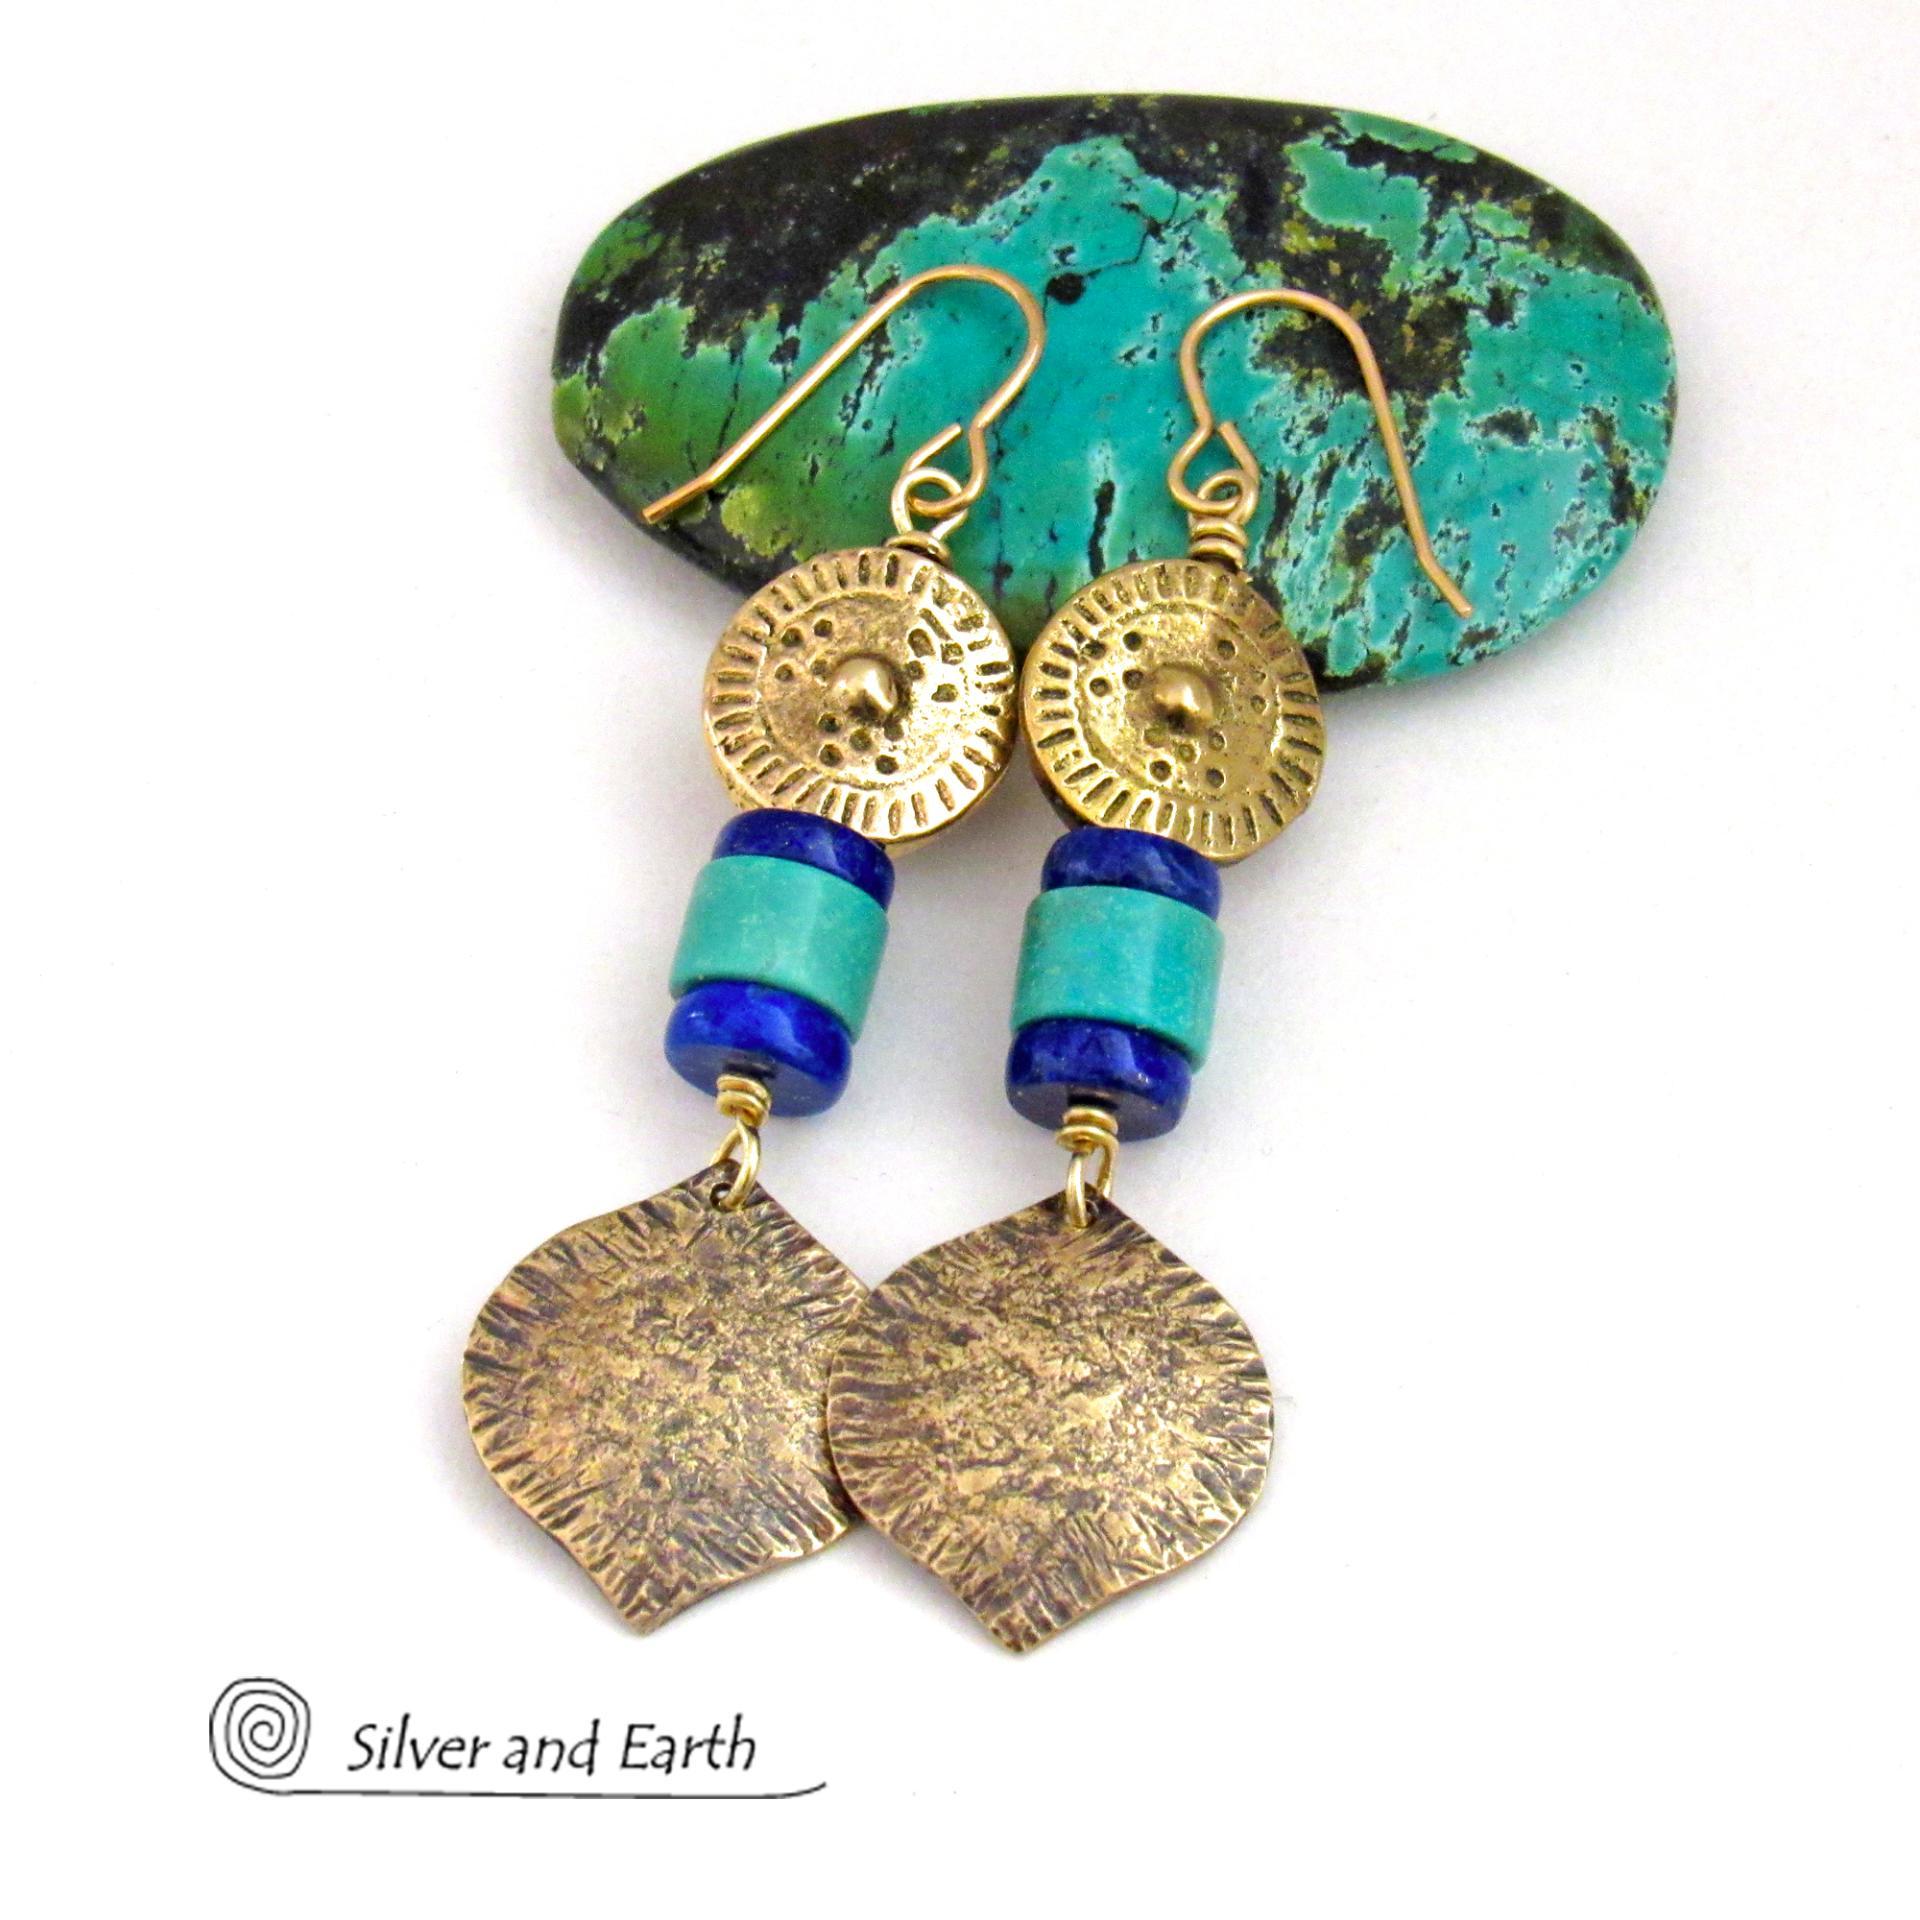 Turquoise and Lapis Gold Brass Earrings with Ethnic Tribal Coin Beads - Bold Exotic Egyptian Style Jewelry